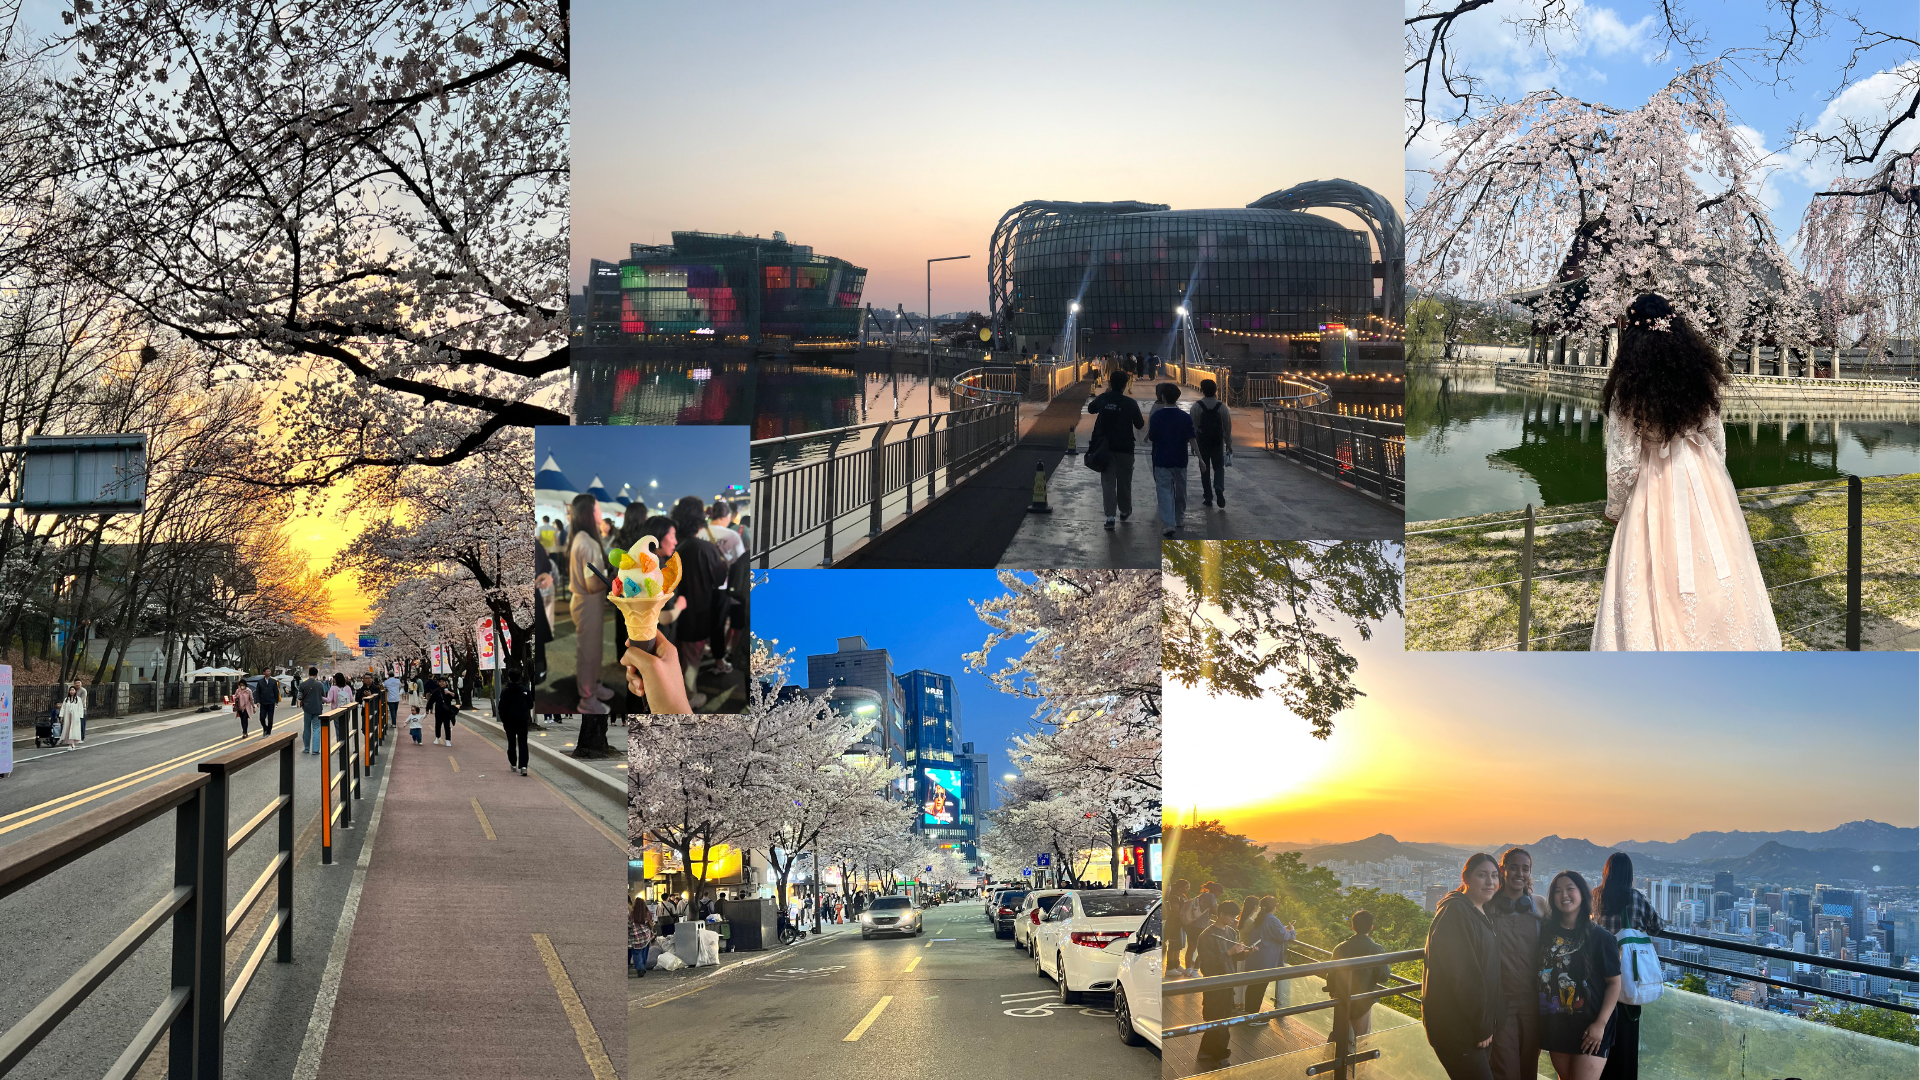 Studying in South Korea: A Story about Cherry Blossoms, a Cat, and a Bakery